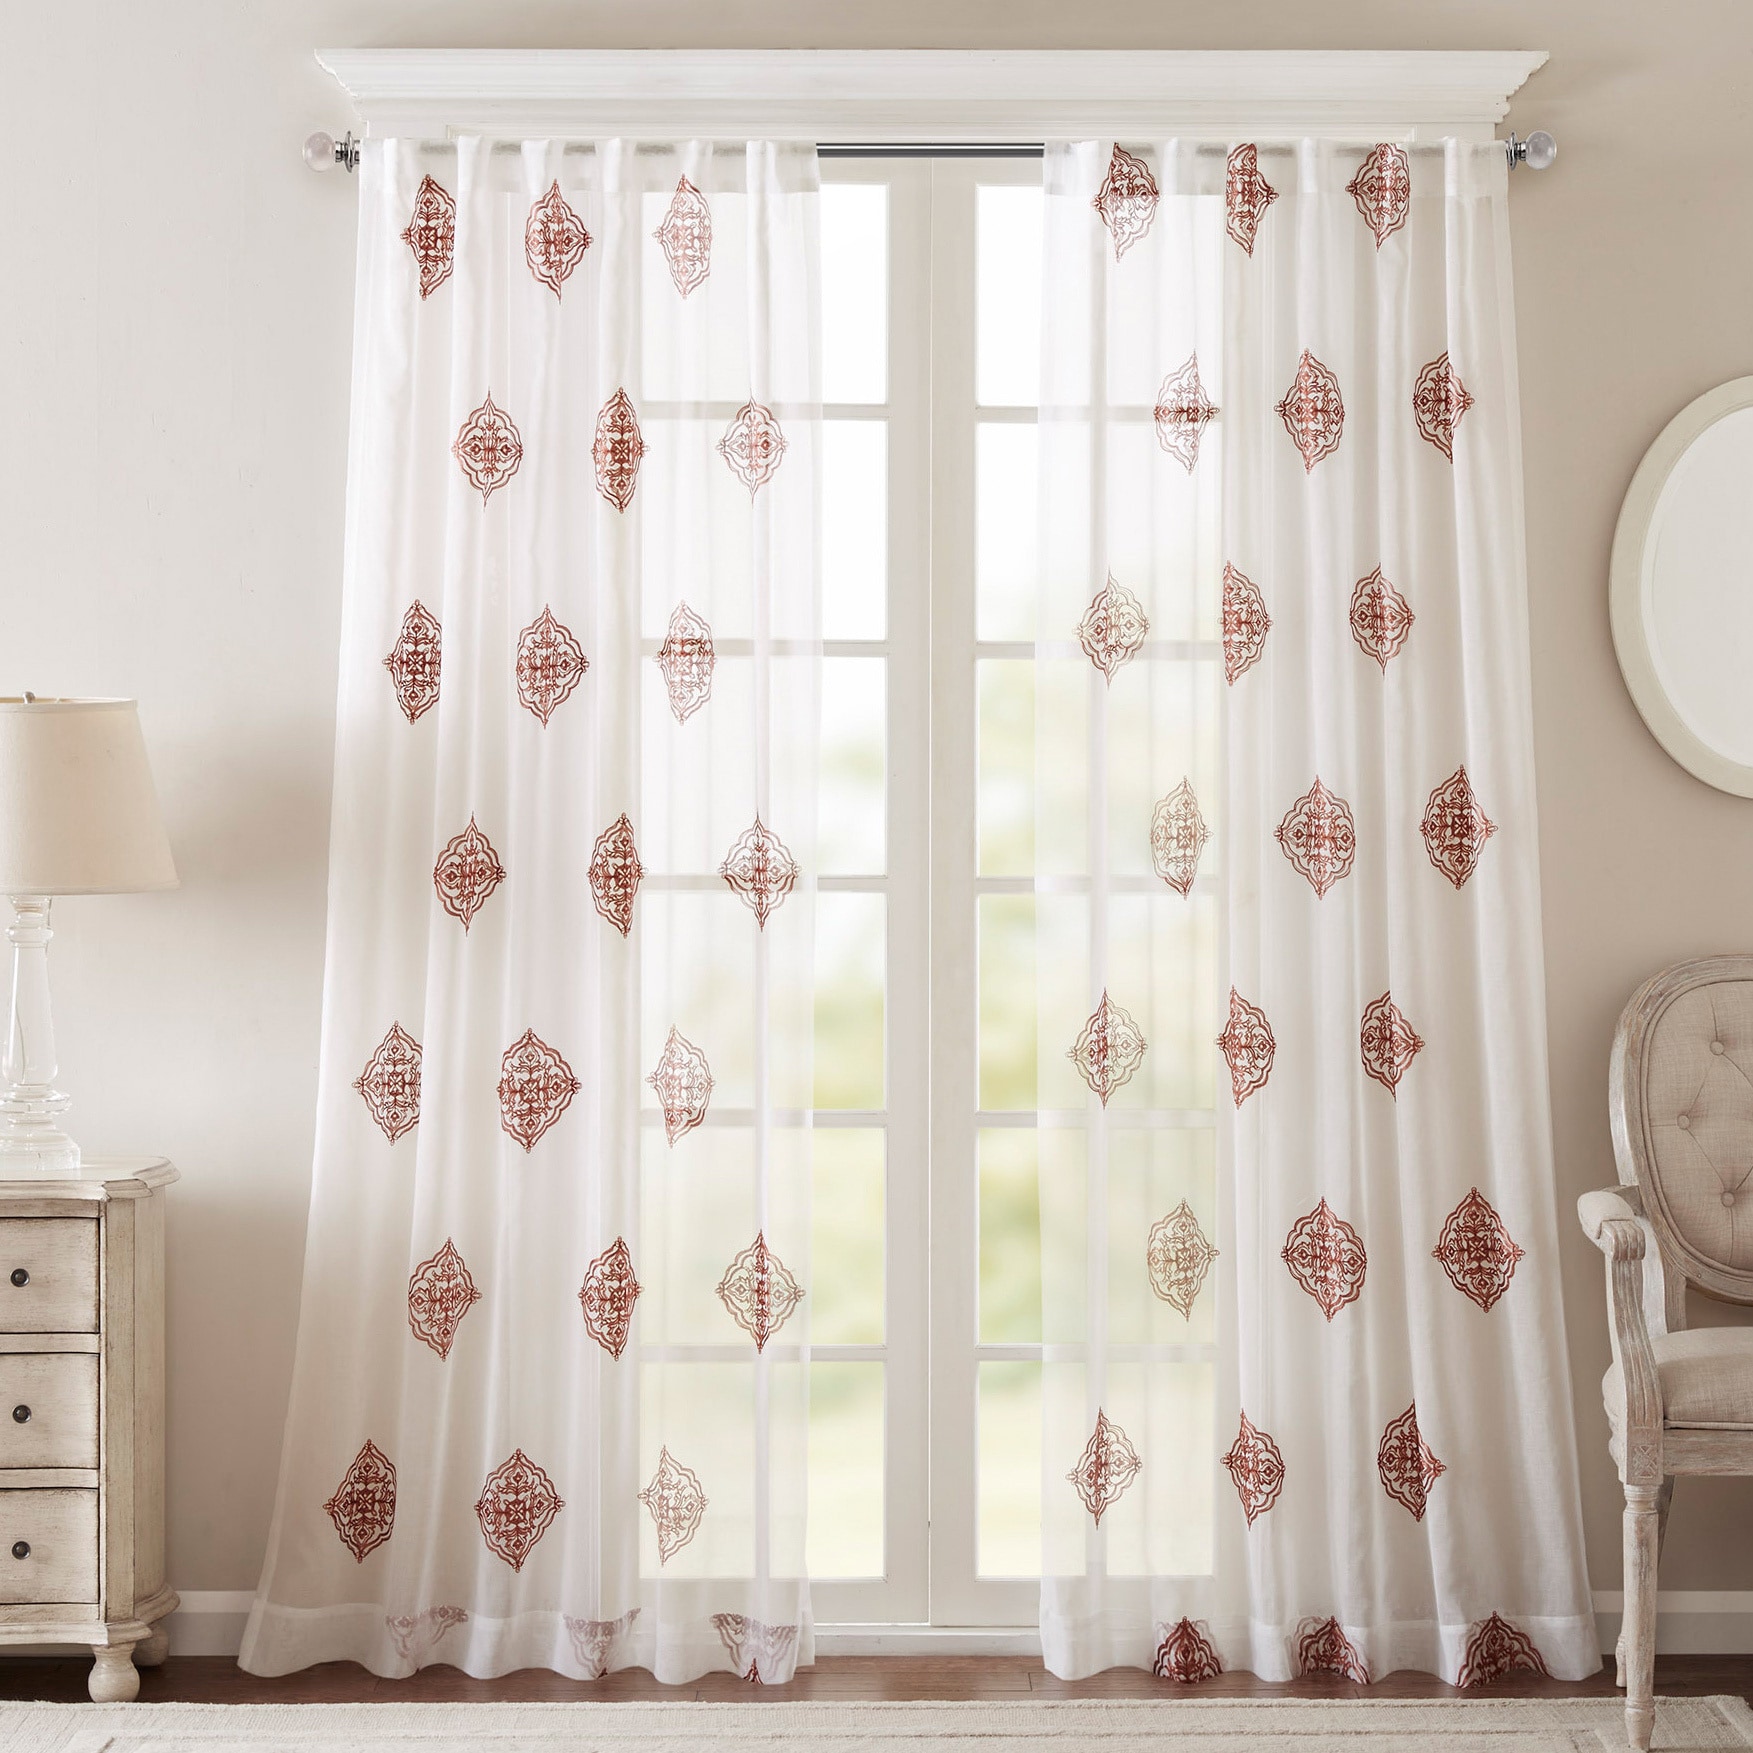 Sheer Elegance: The Beauty Of Translucent Curtains In Decor